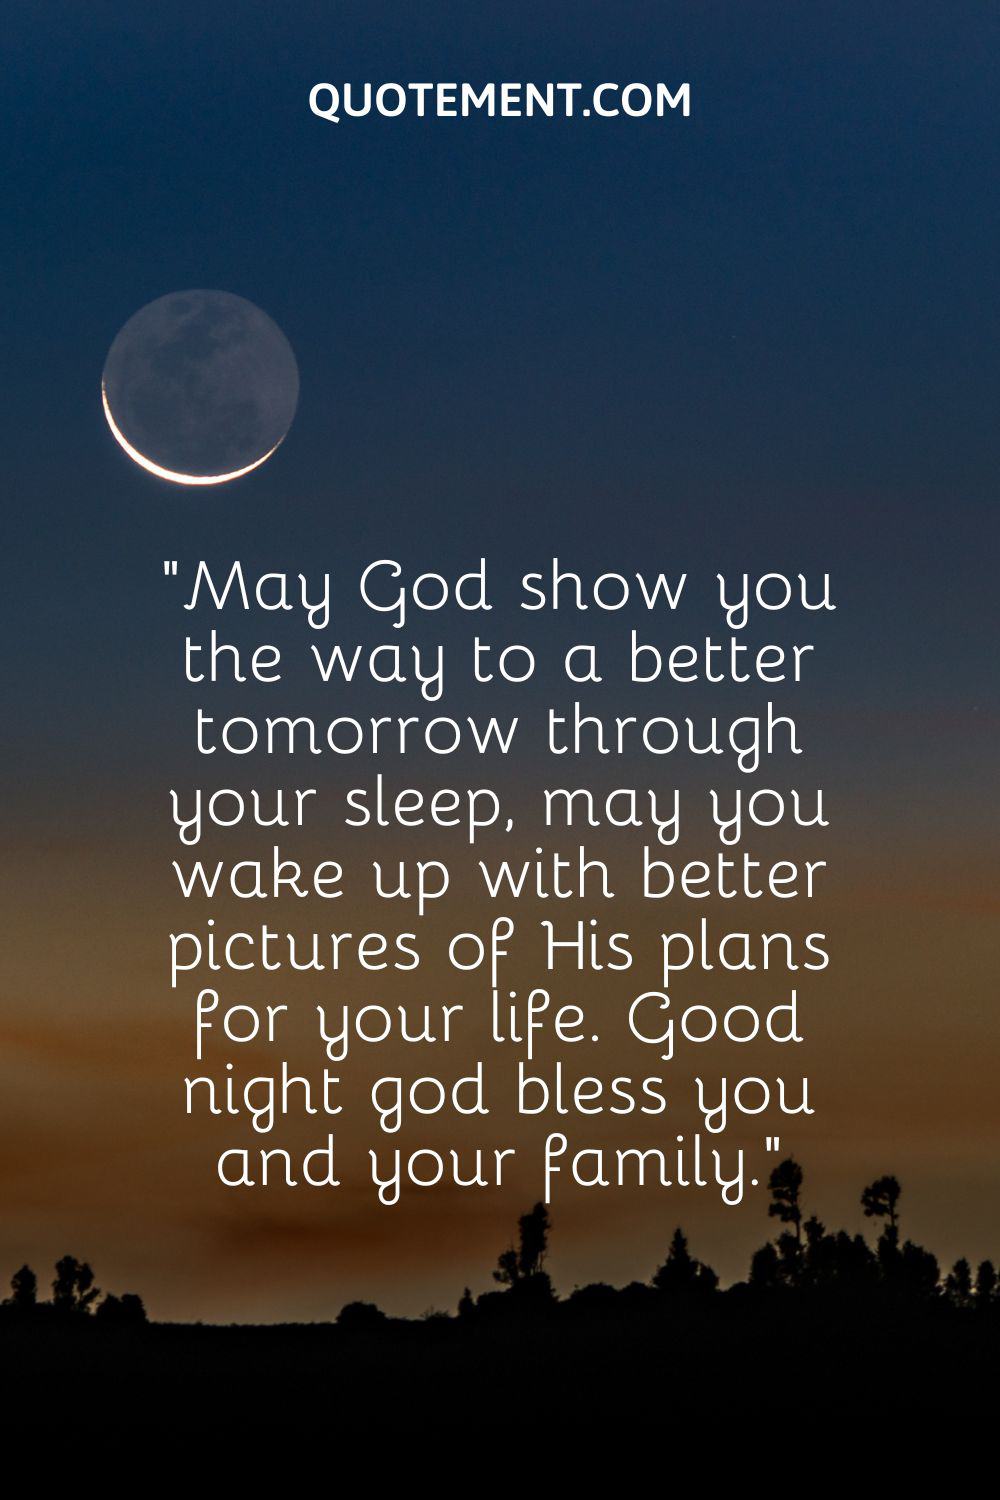 May God show you the way to a better tomorrow through your sleep